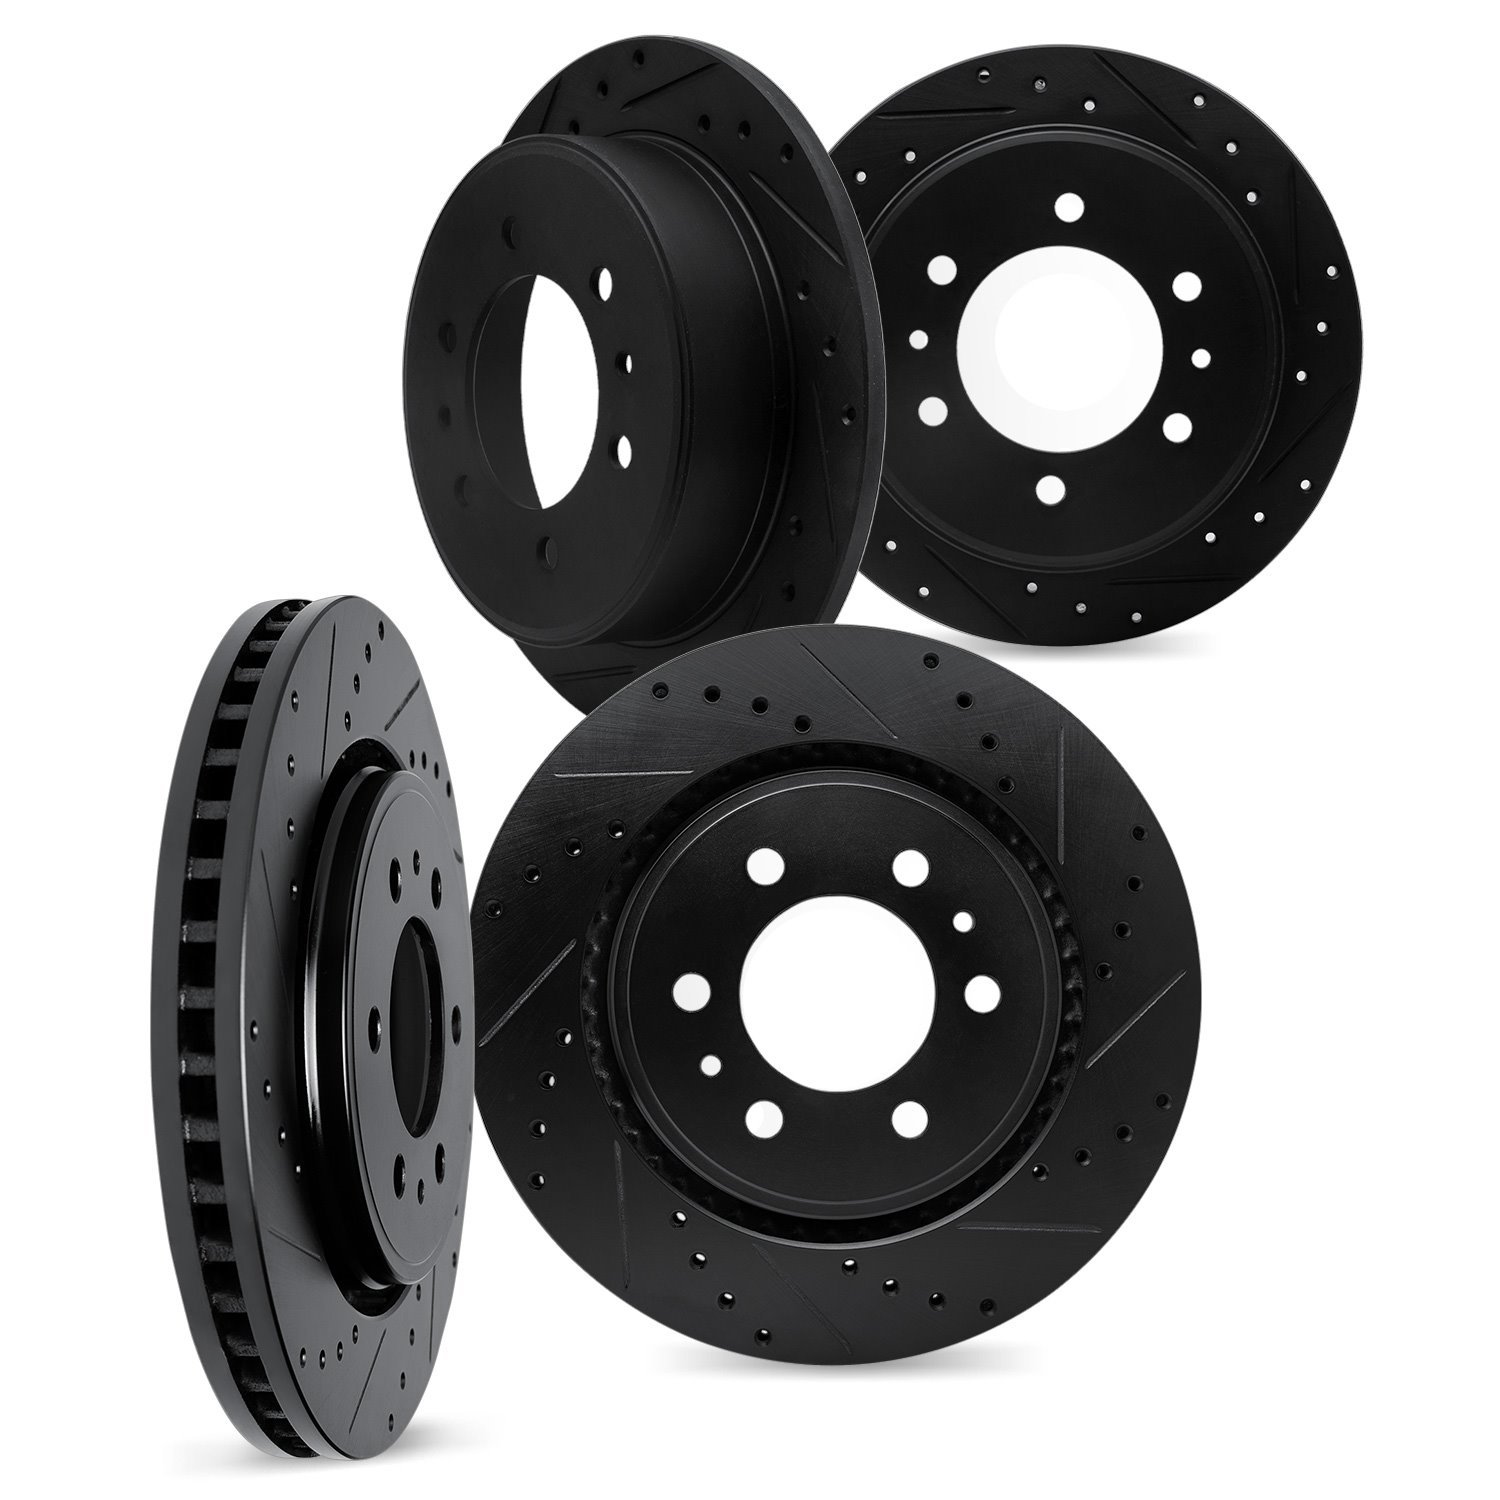 8004-40179 Drilled/Slotted Brake Rotors [Black], Fits Select Multiple Makes/Models, Position: Front and Rear